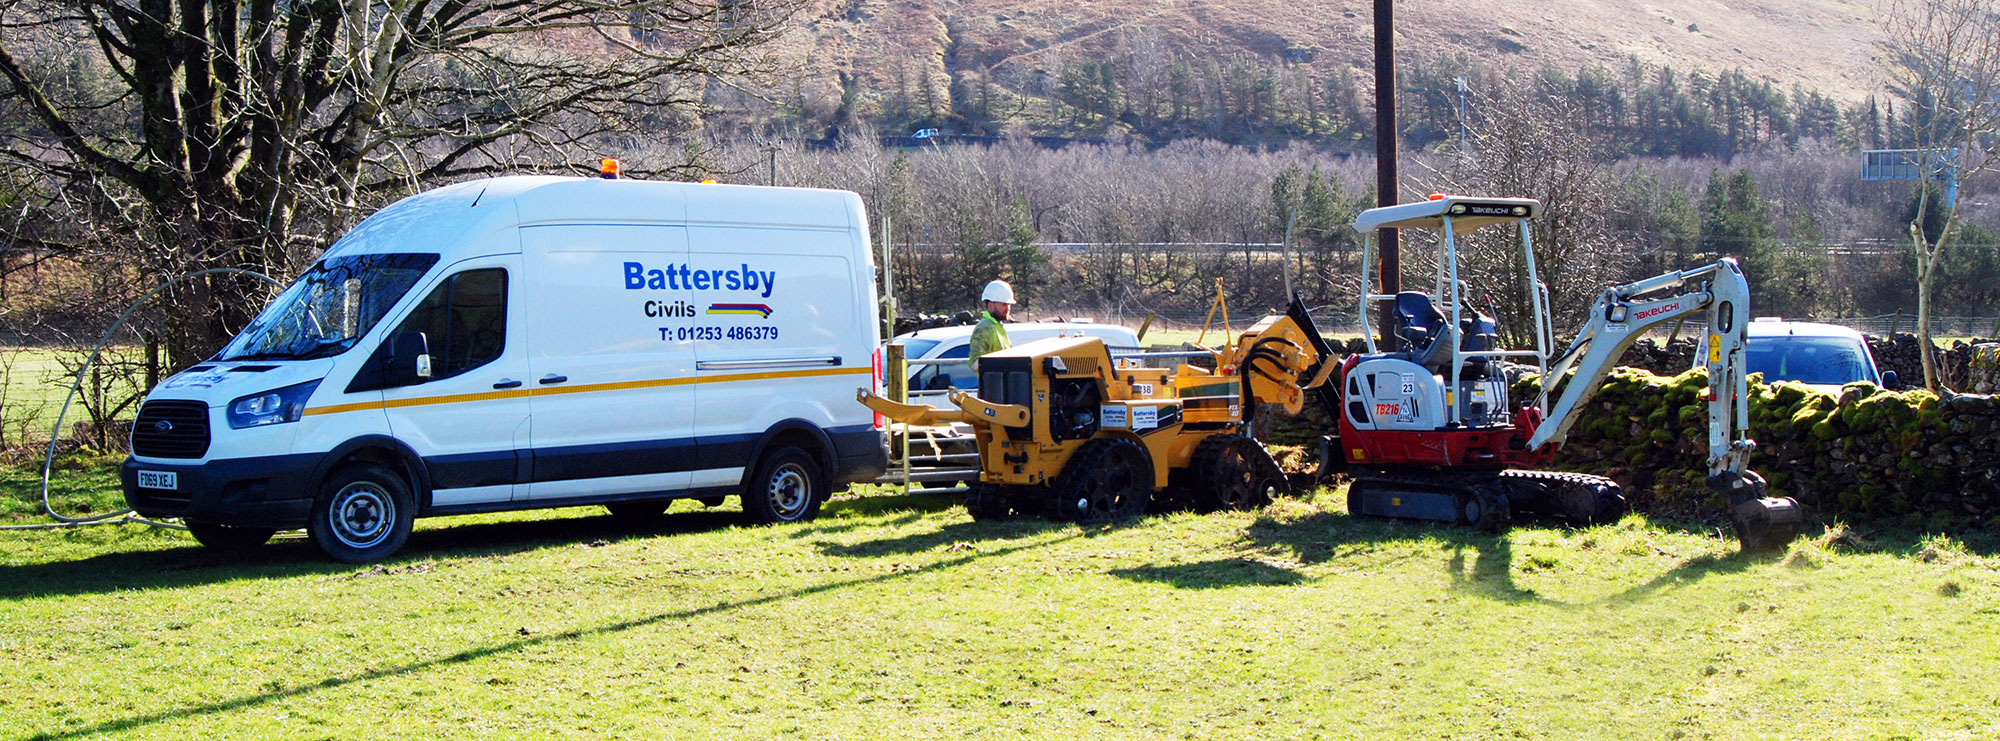 About Battersby Civils